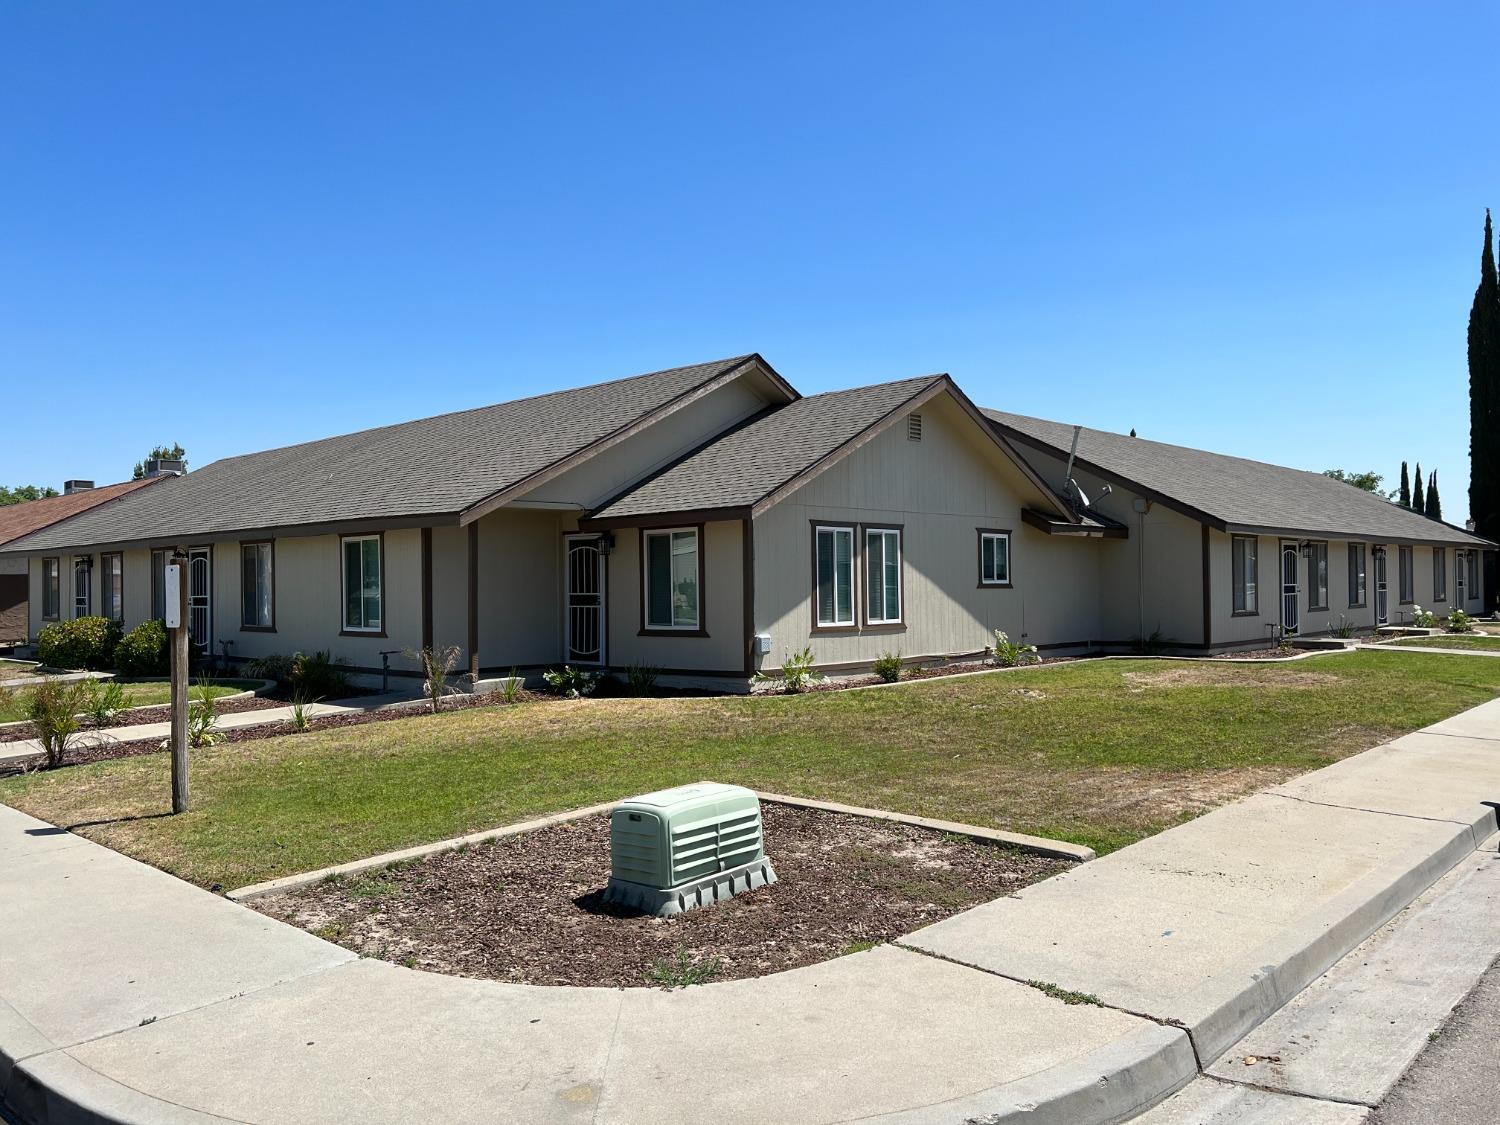 Photo of 1178 Beverly Dr in Lemoore, CA